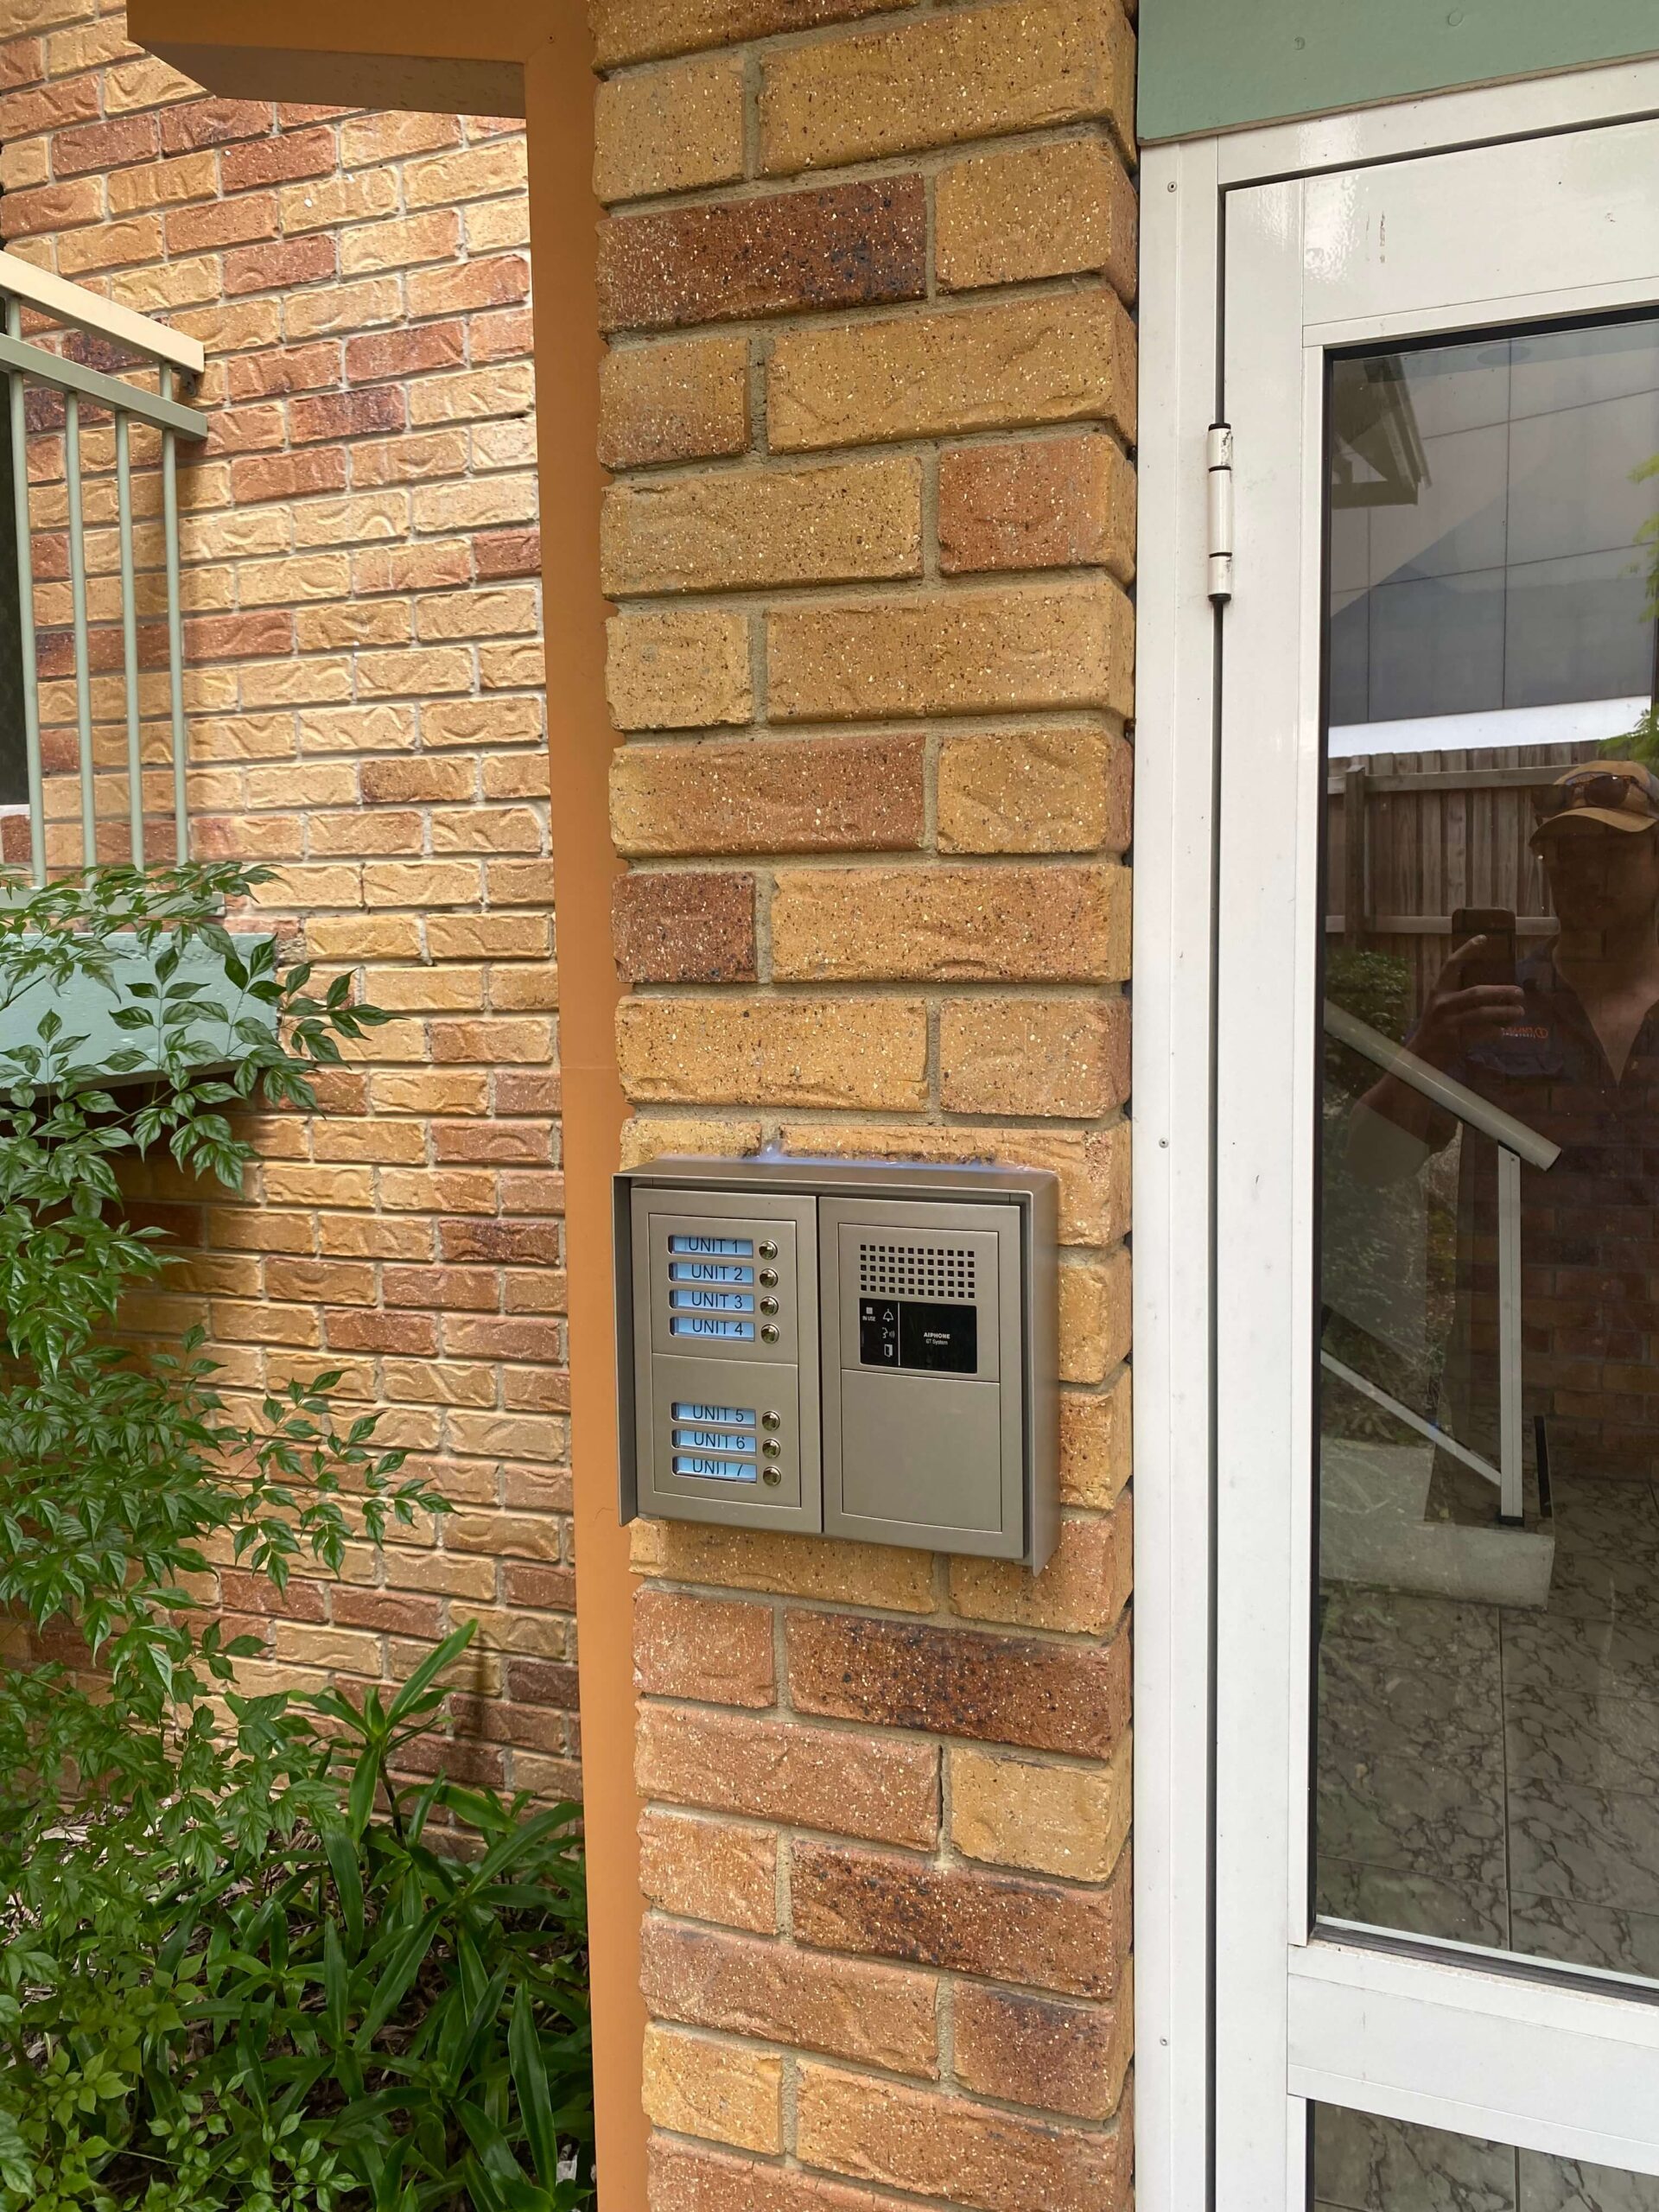 After the new installation of the intercom system